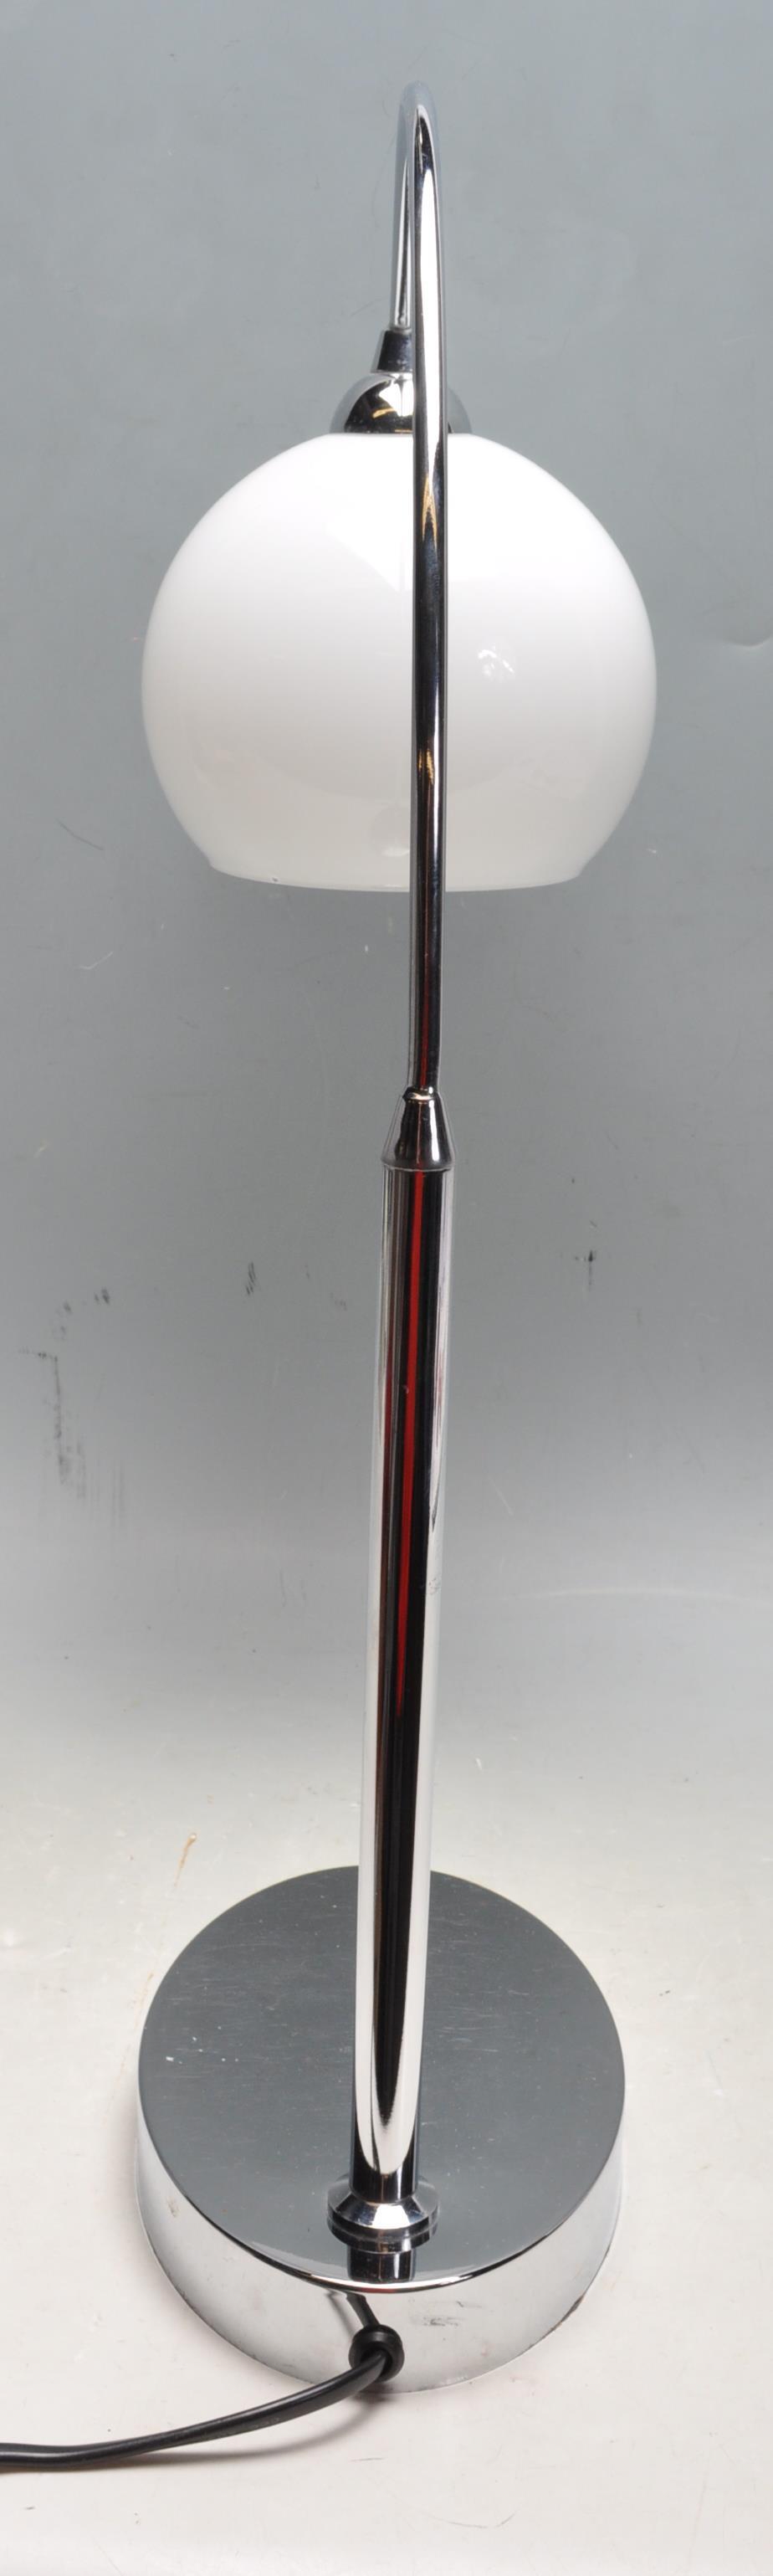 CONTEMPORARY CHROME AND GLASS DESK LAMP - Image 4 of 5